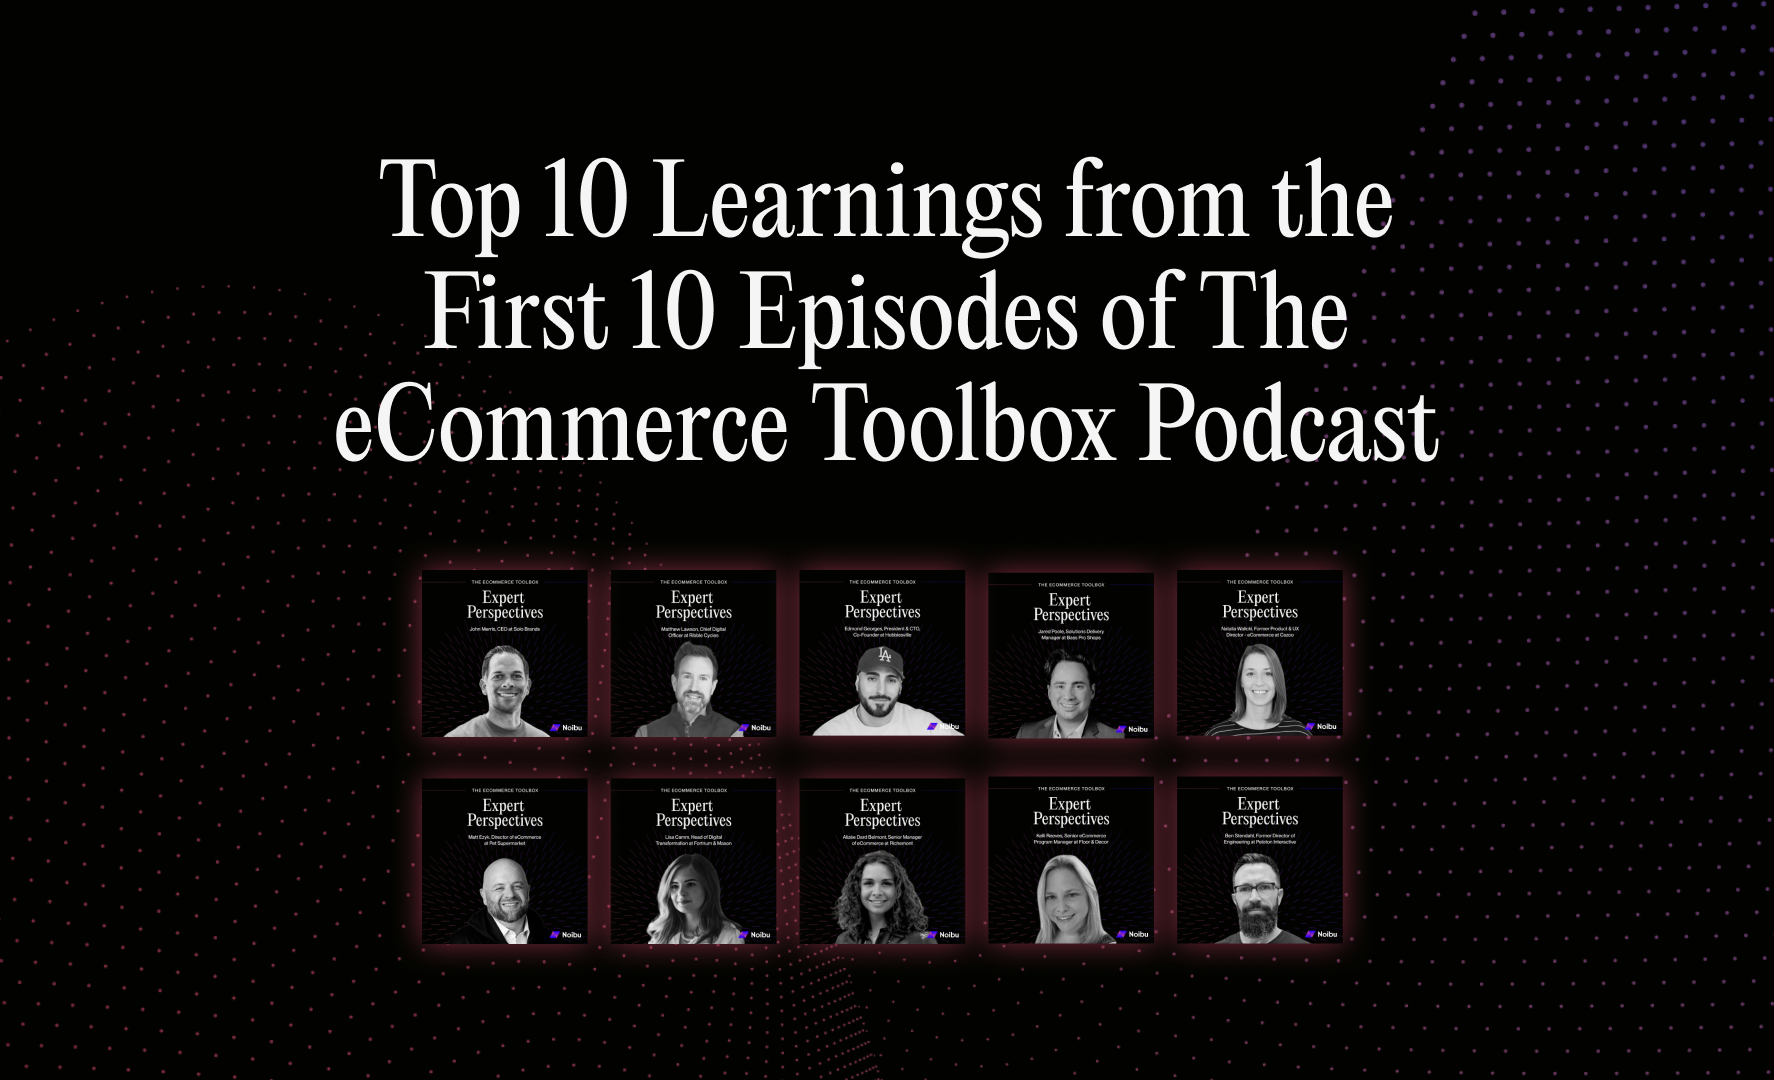 Learnings from the eCommerce toolbox podcast